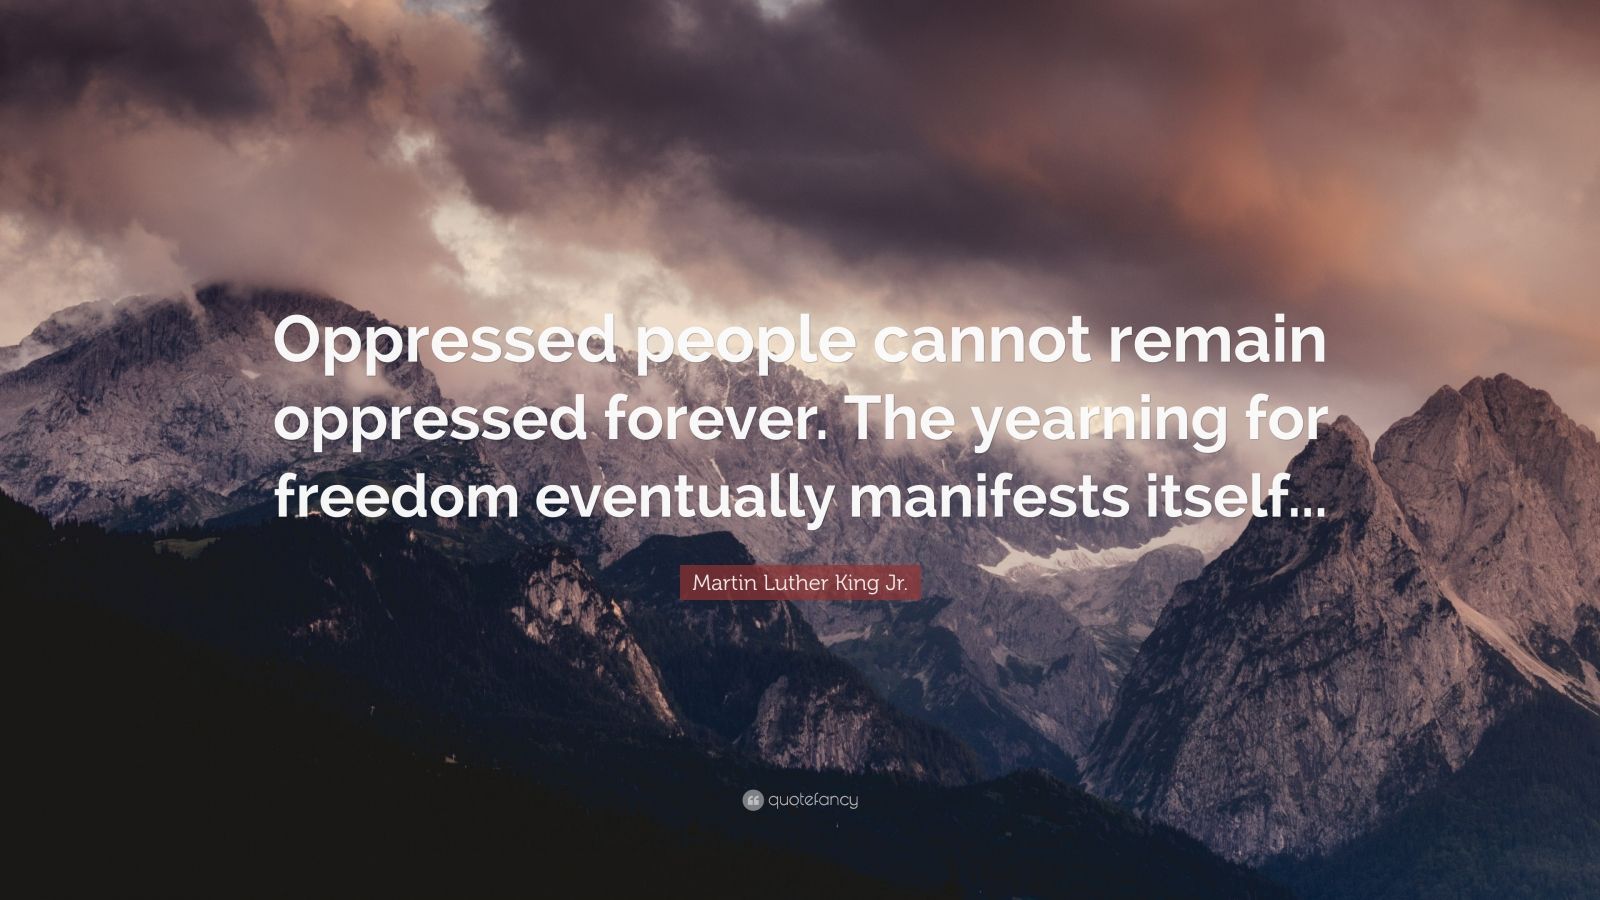 Martin Luther King Jr. Quote: “Oppressed people cannot remain oppressed ...